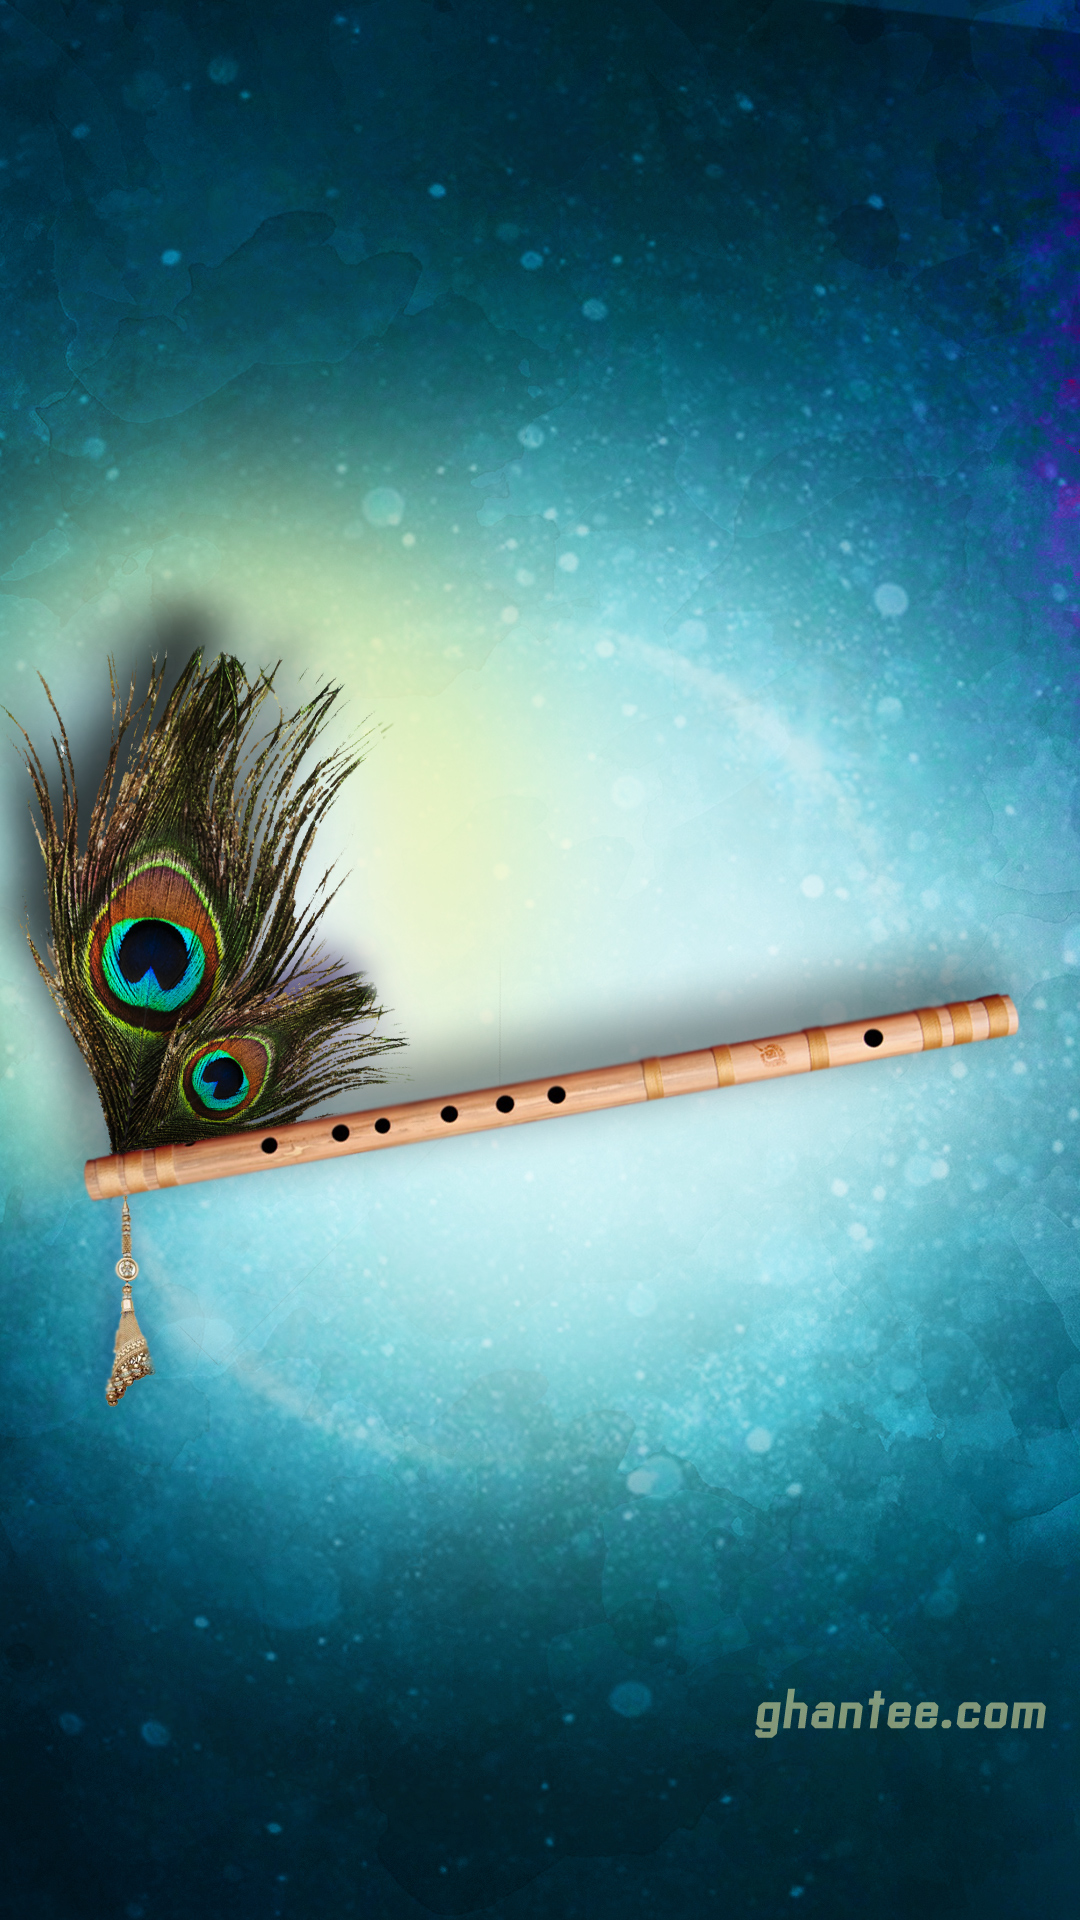 Peacock Feather Images - Free Download on Freepik